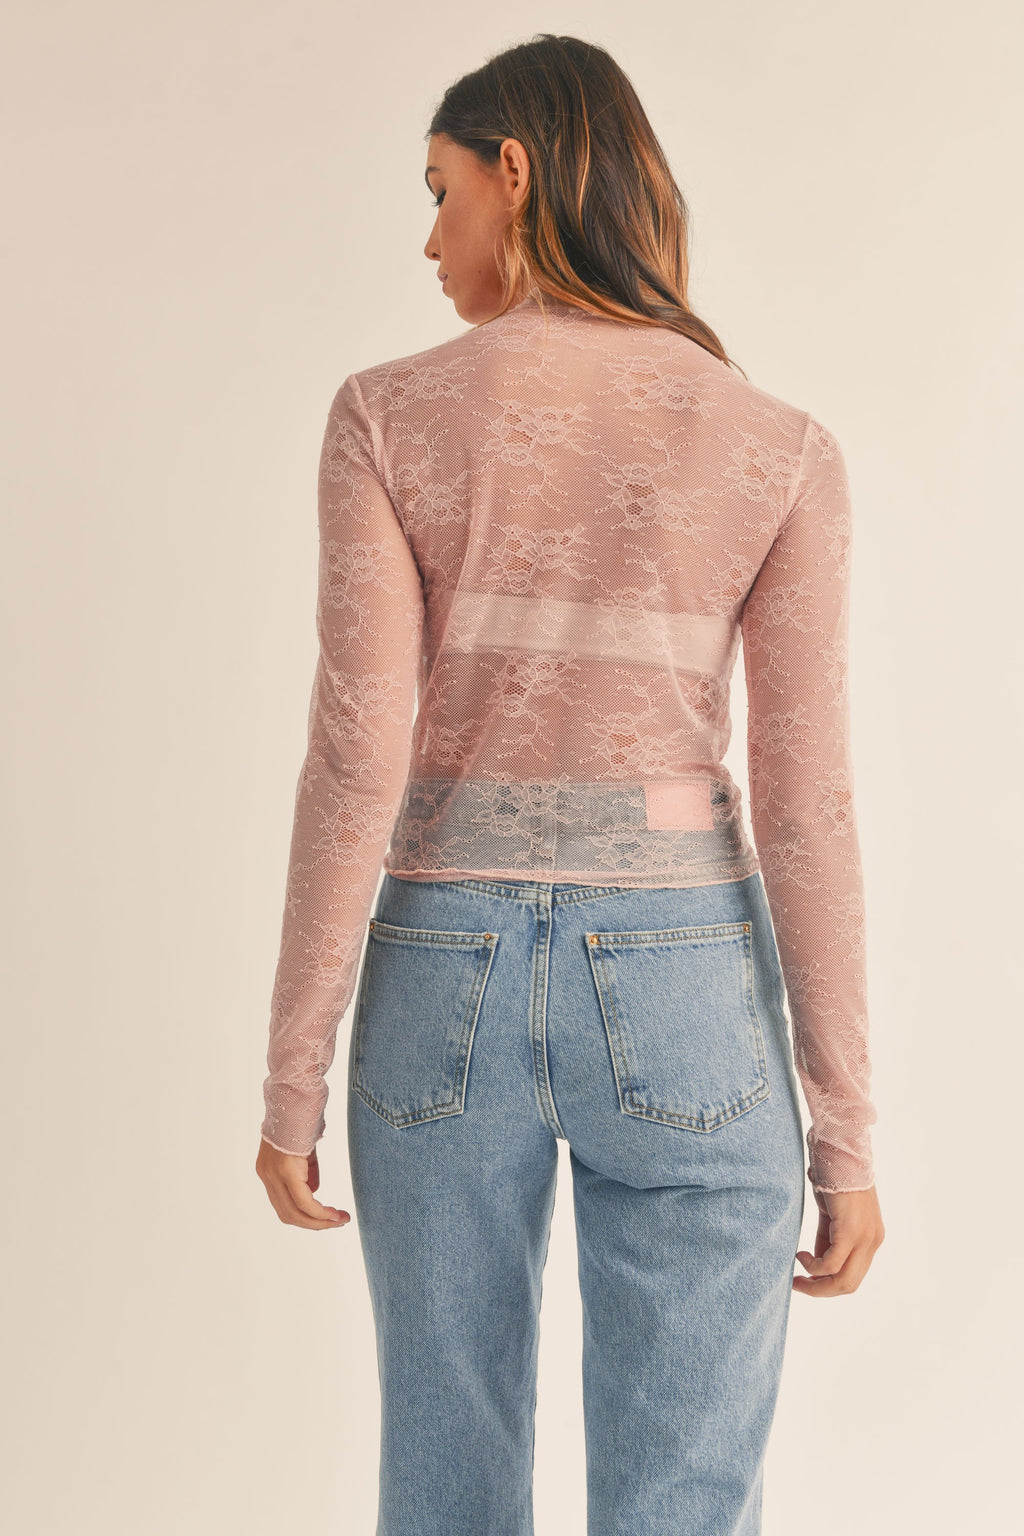 Floral Mesh Layering Top FINAL SALE